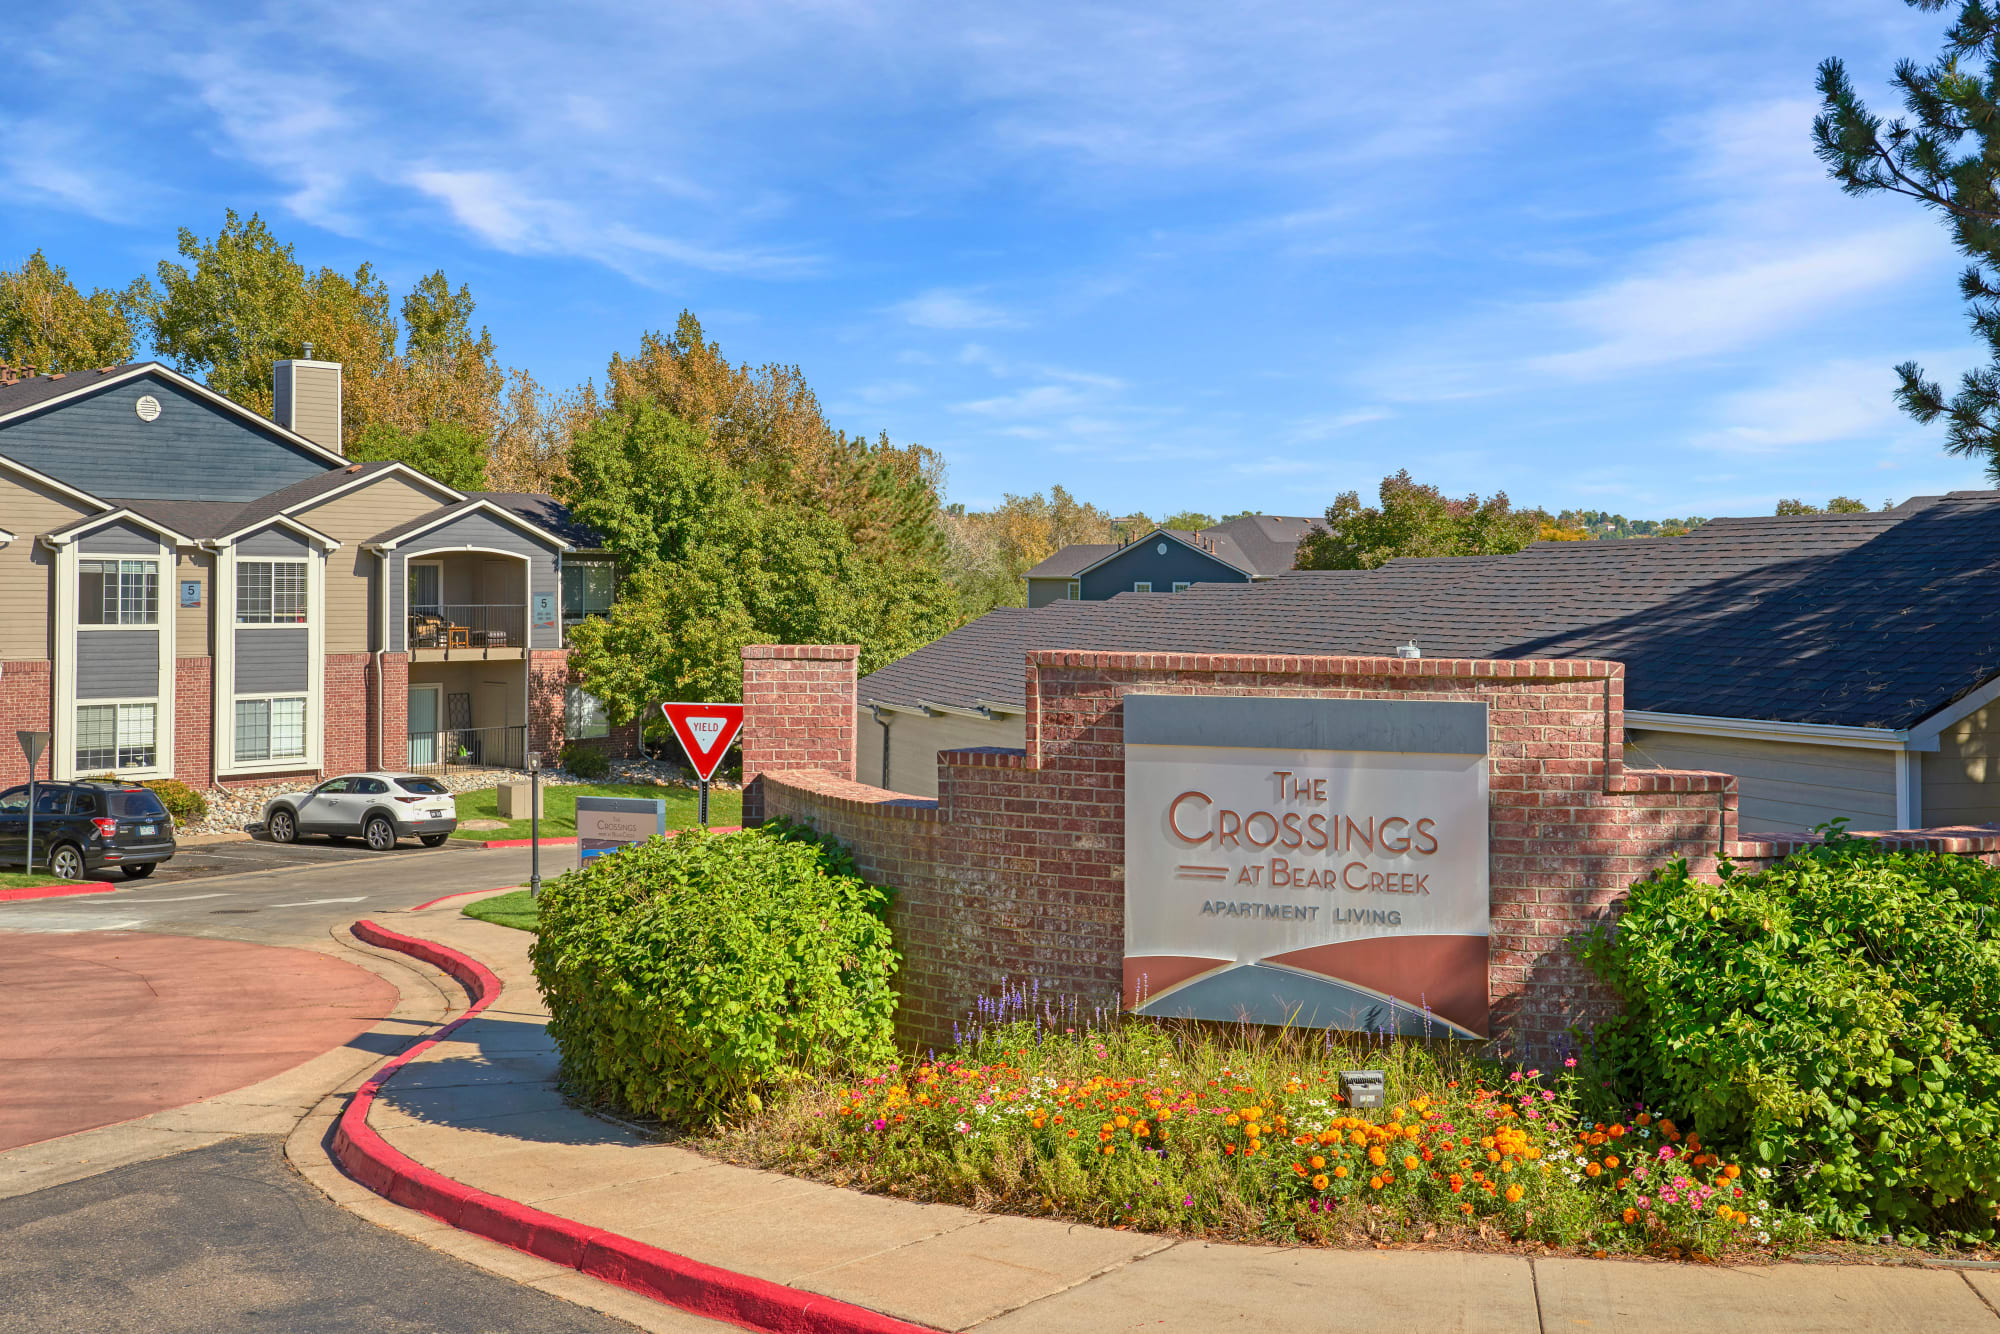 The monument sign at The Crossings at Bear Creek Apartments in Lakewood, Colorado